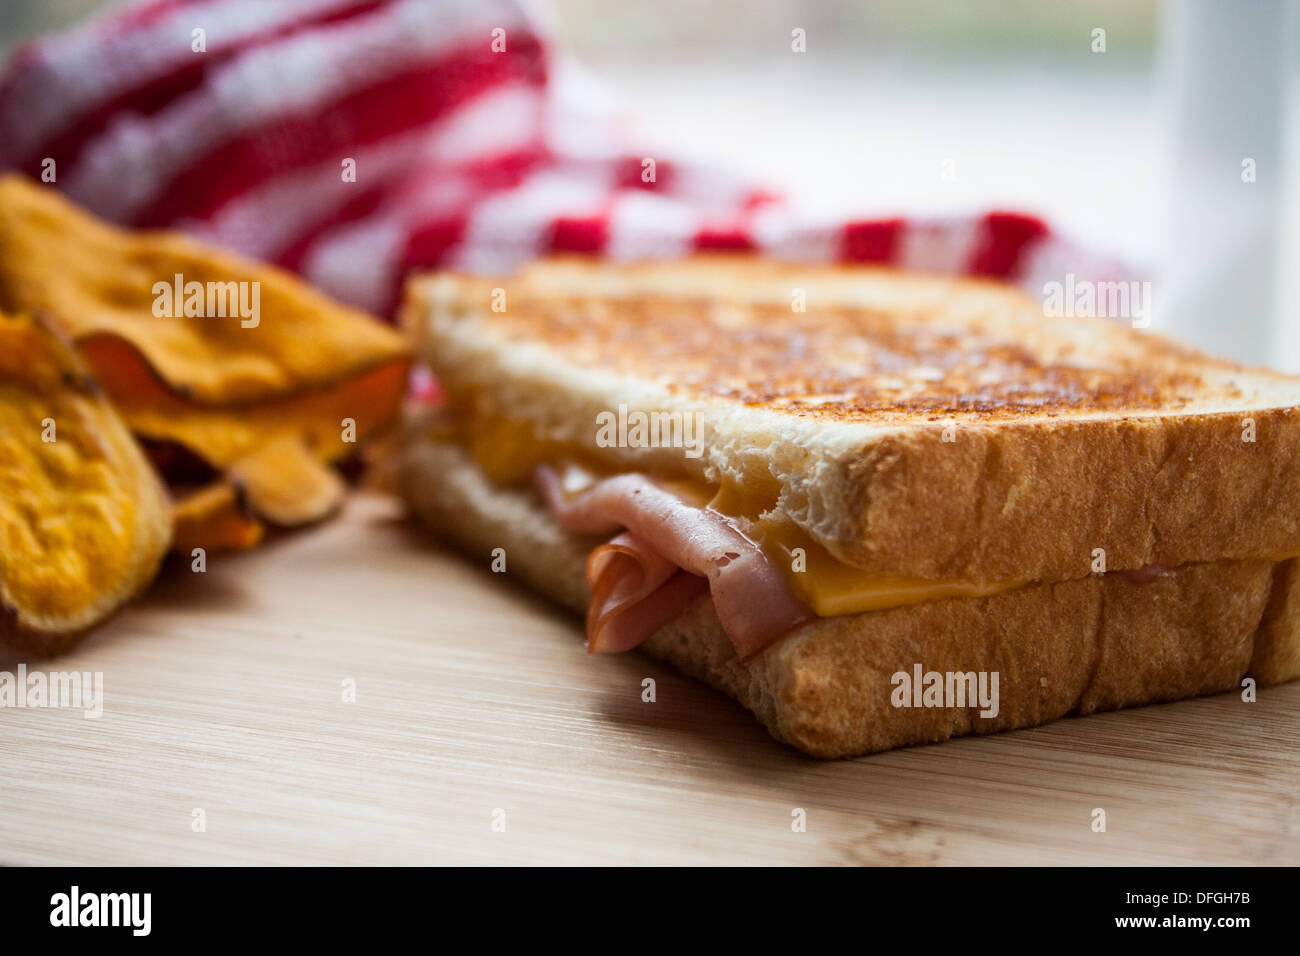 Grilled ham and cheese sandwich on a wooden cutting board with sweet potato chips. Stock Photo